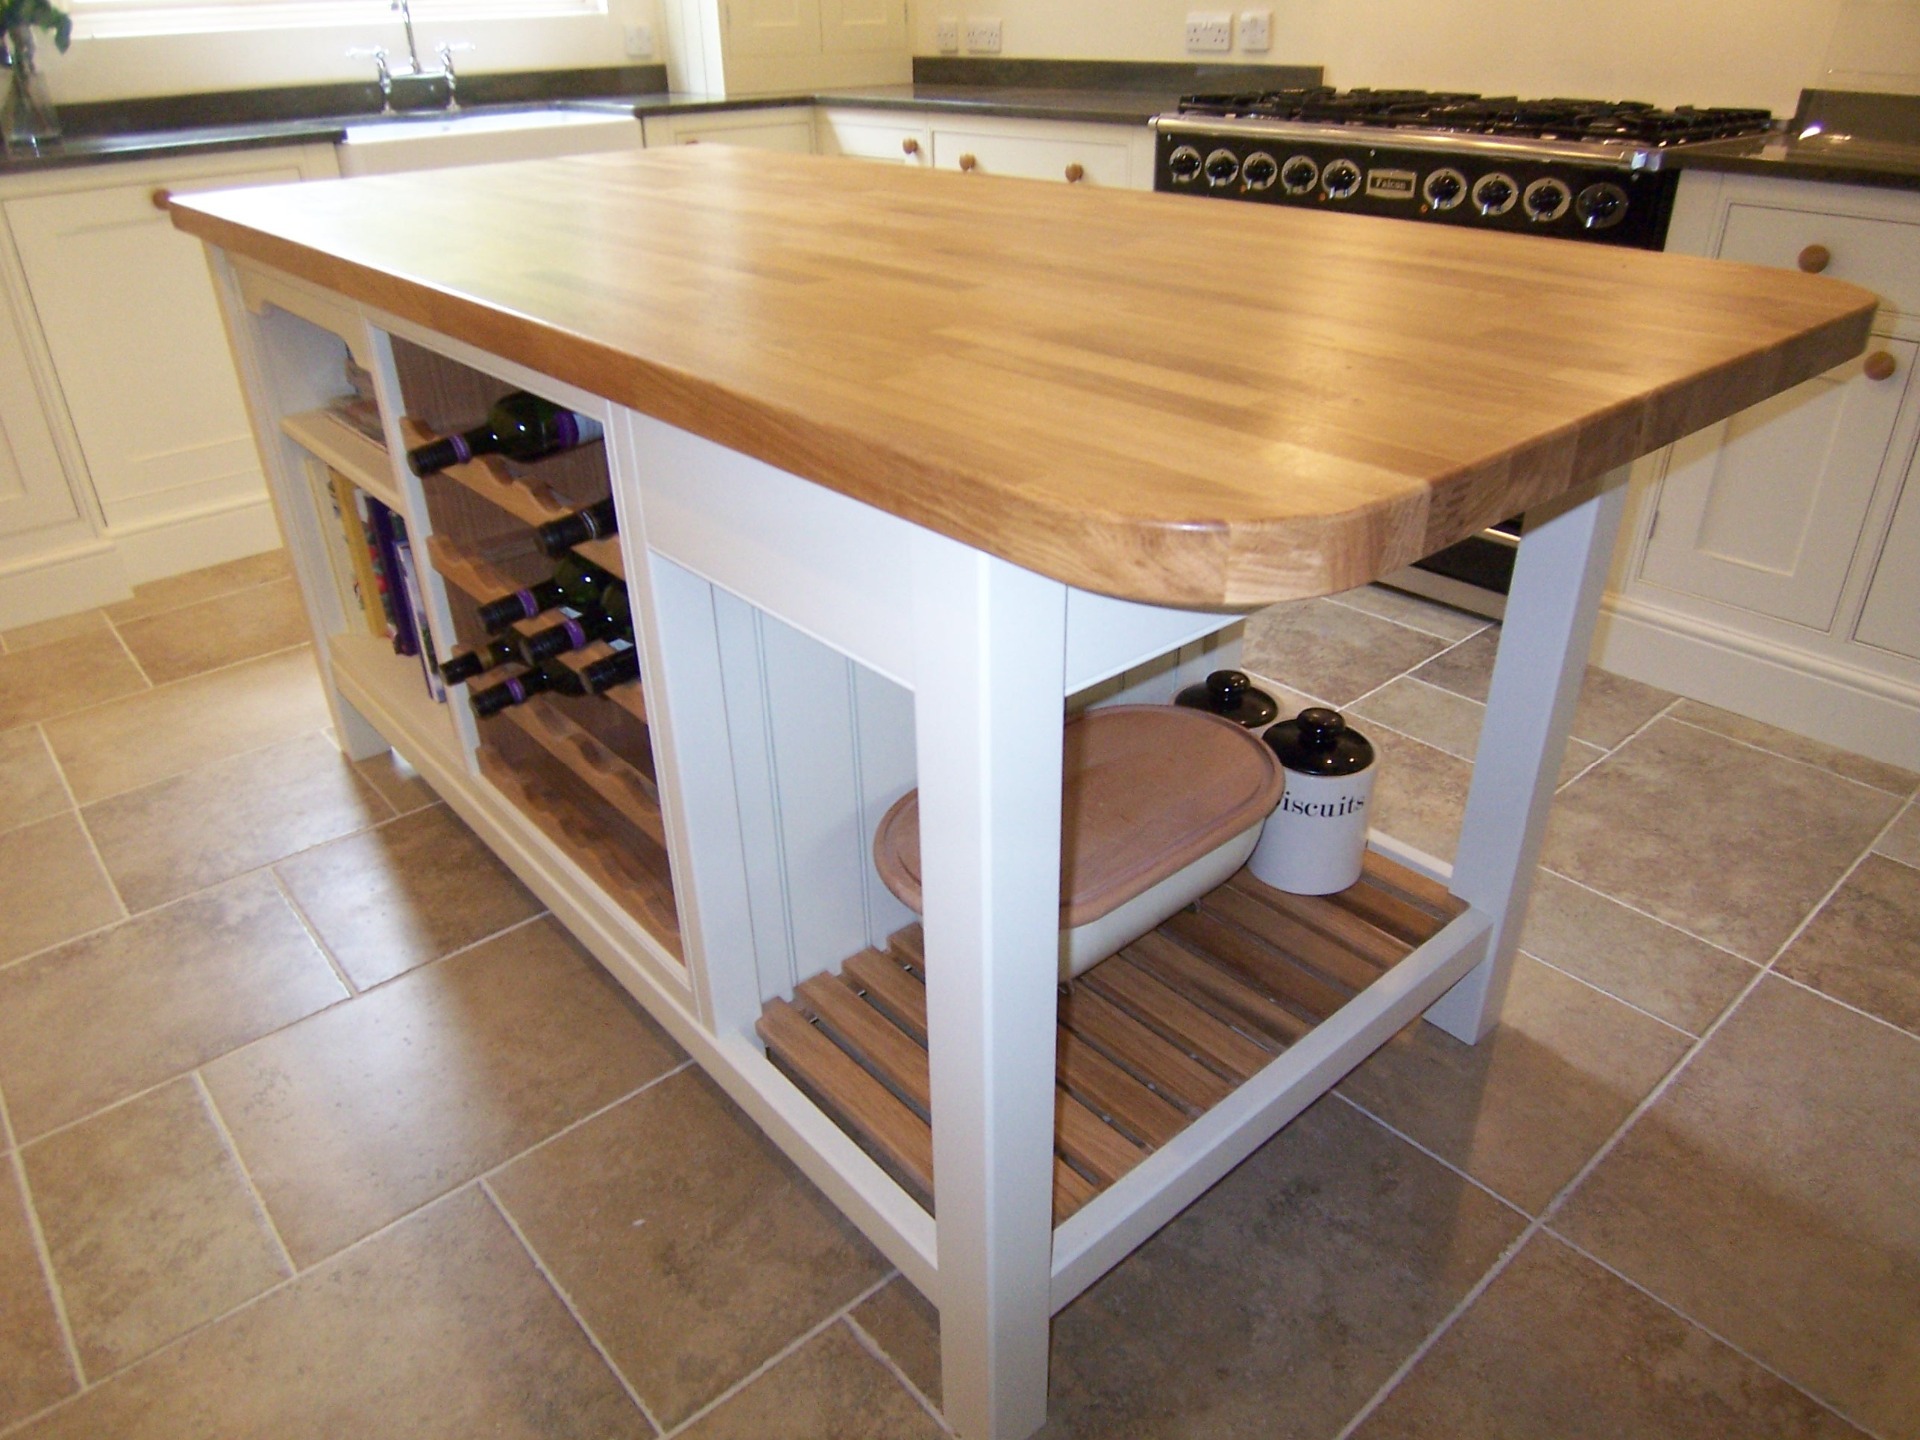 Shaker style island with timber worktop